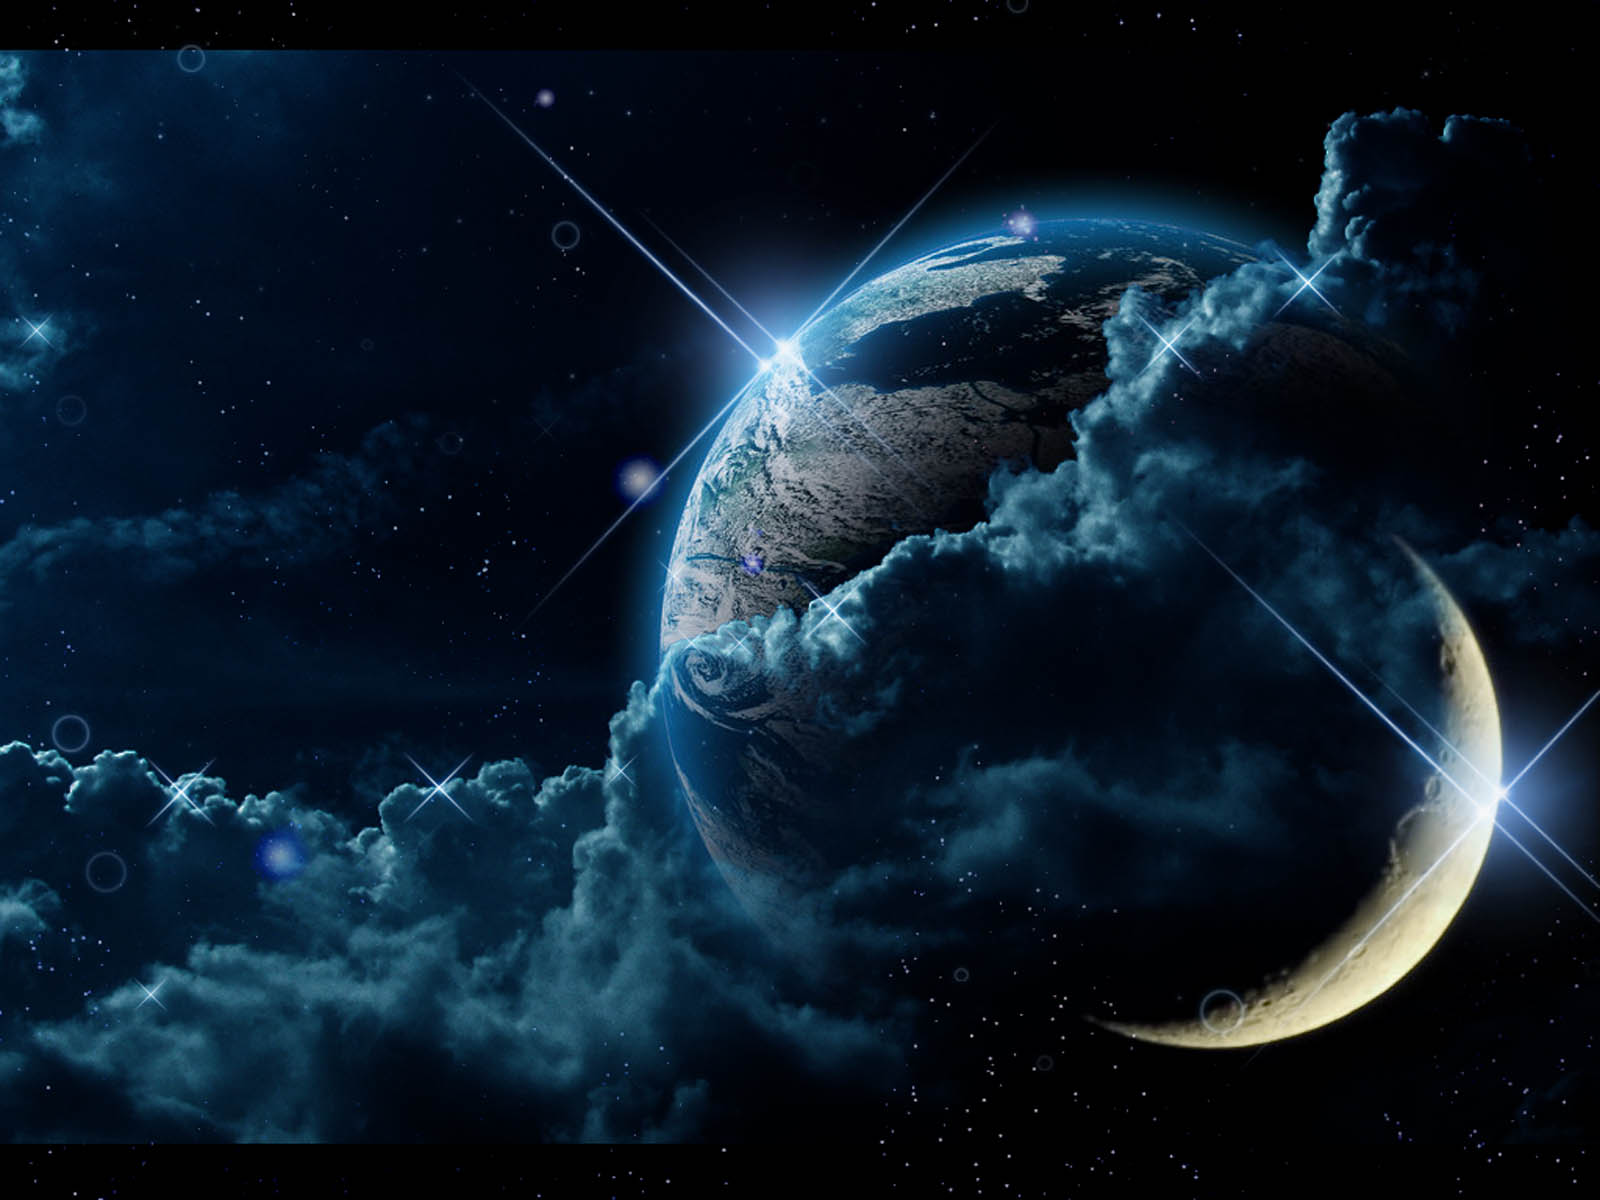 moon 4k ultra hd wallpaper background image 3840x2160 on fantasy moon wallpapers